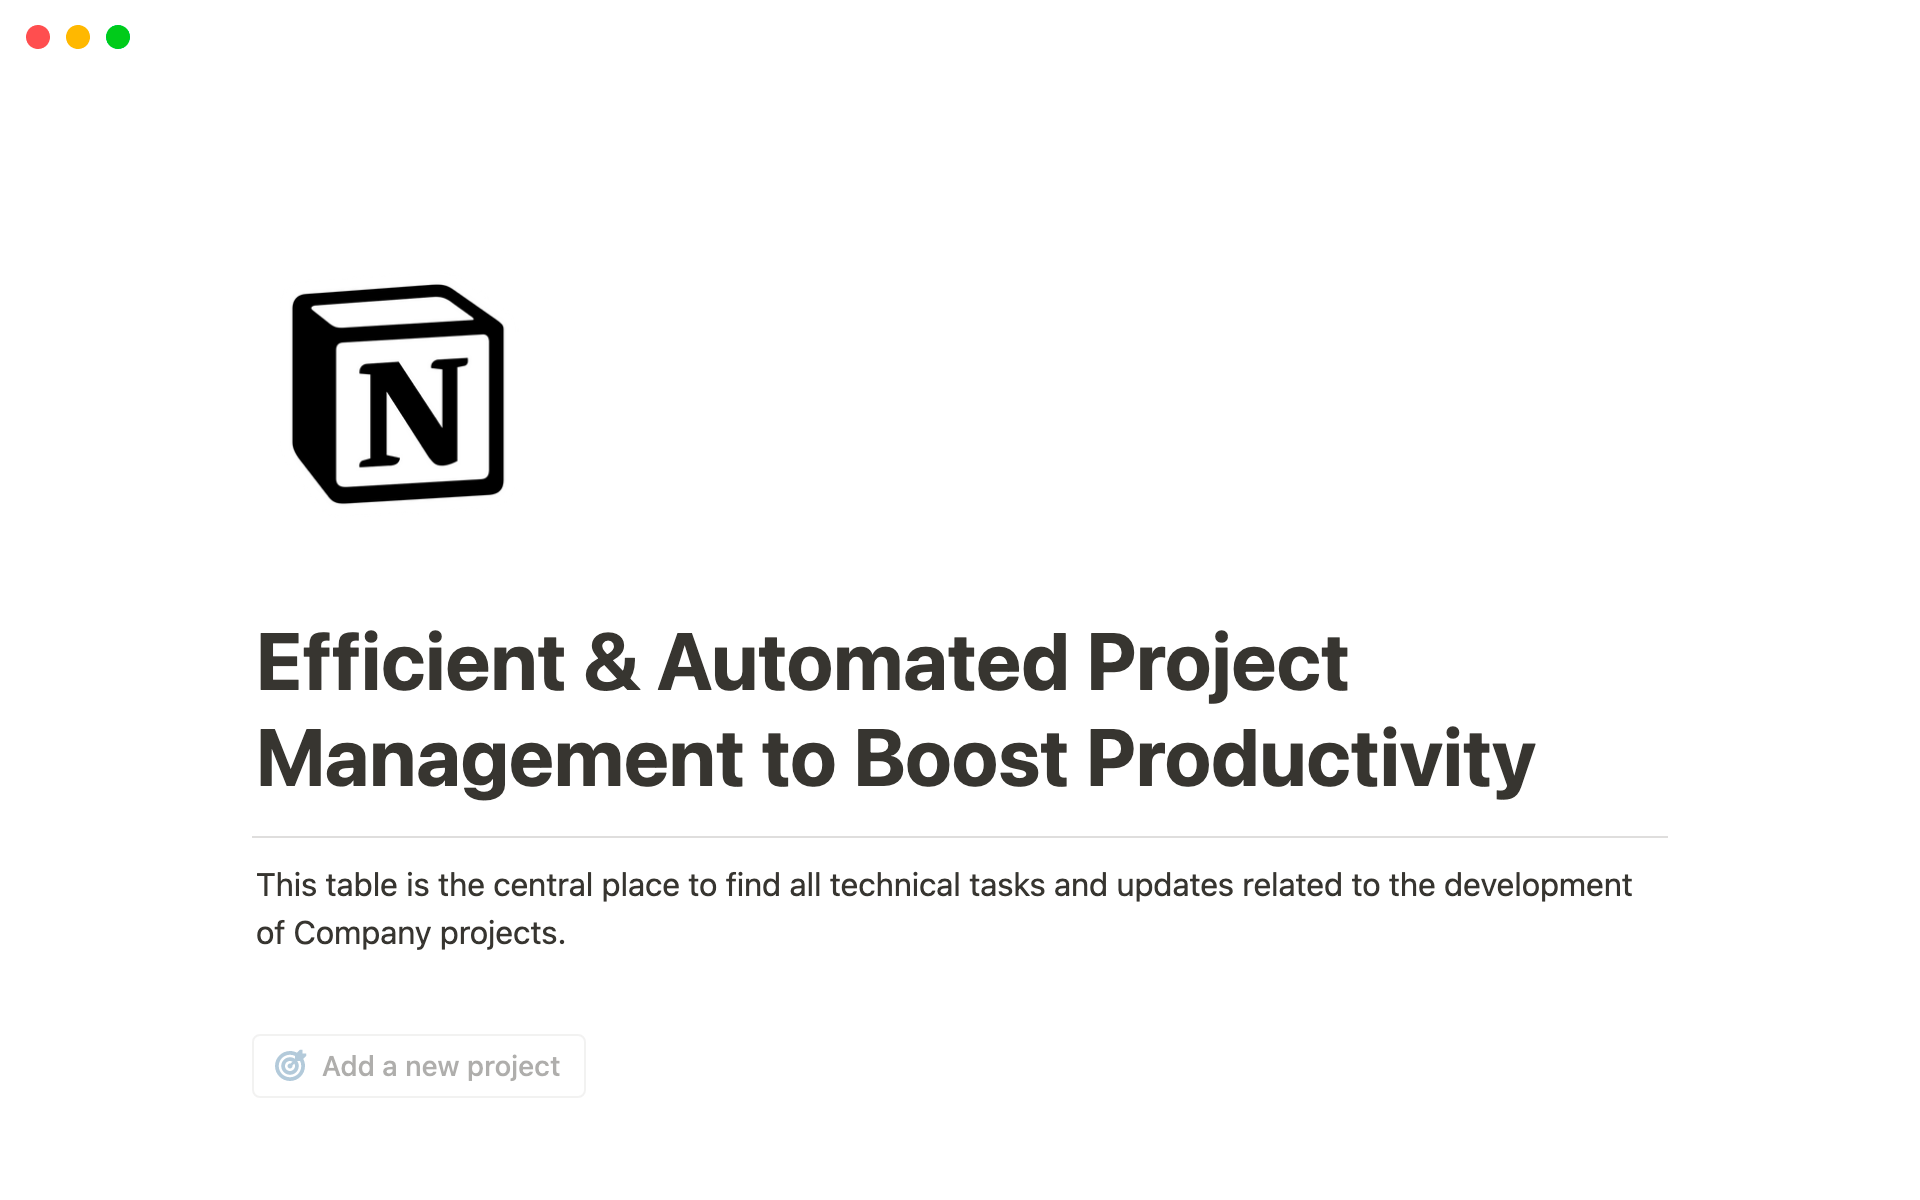 Efficient & Automated Project Management to Boost Productivityのテンプレートのプレビュー